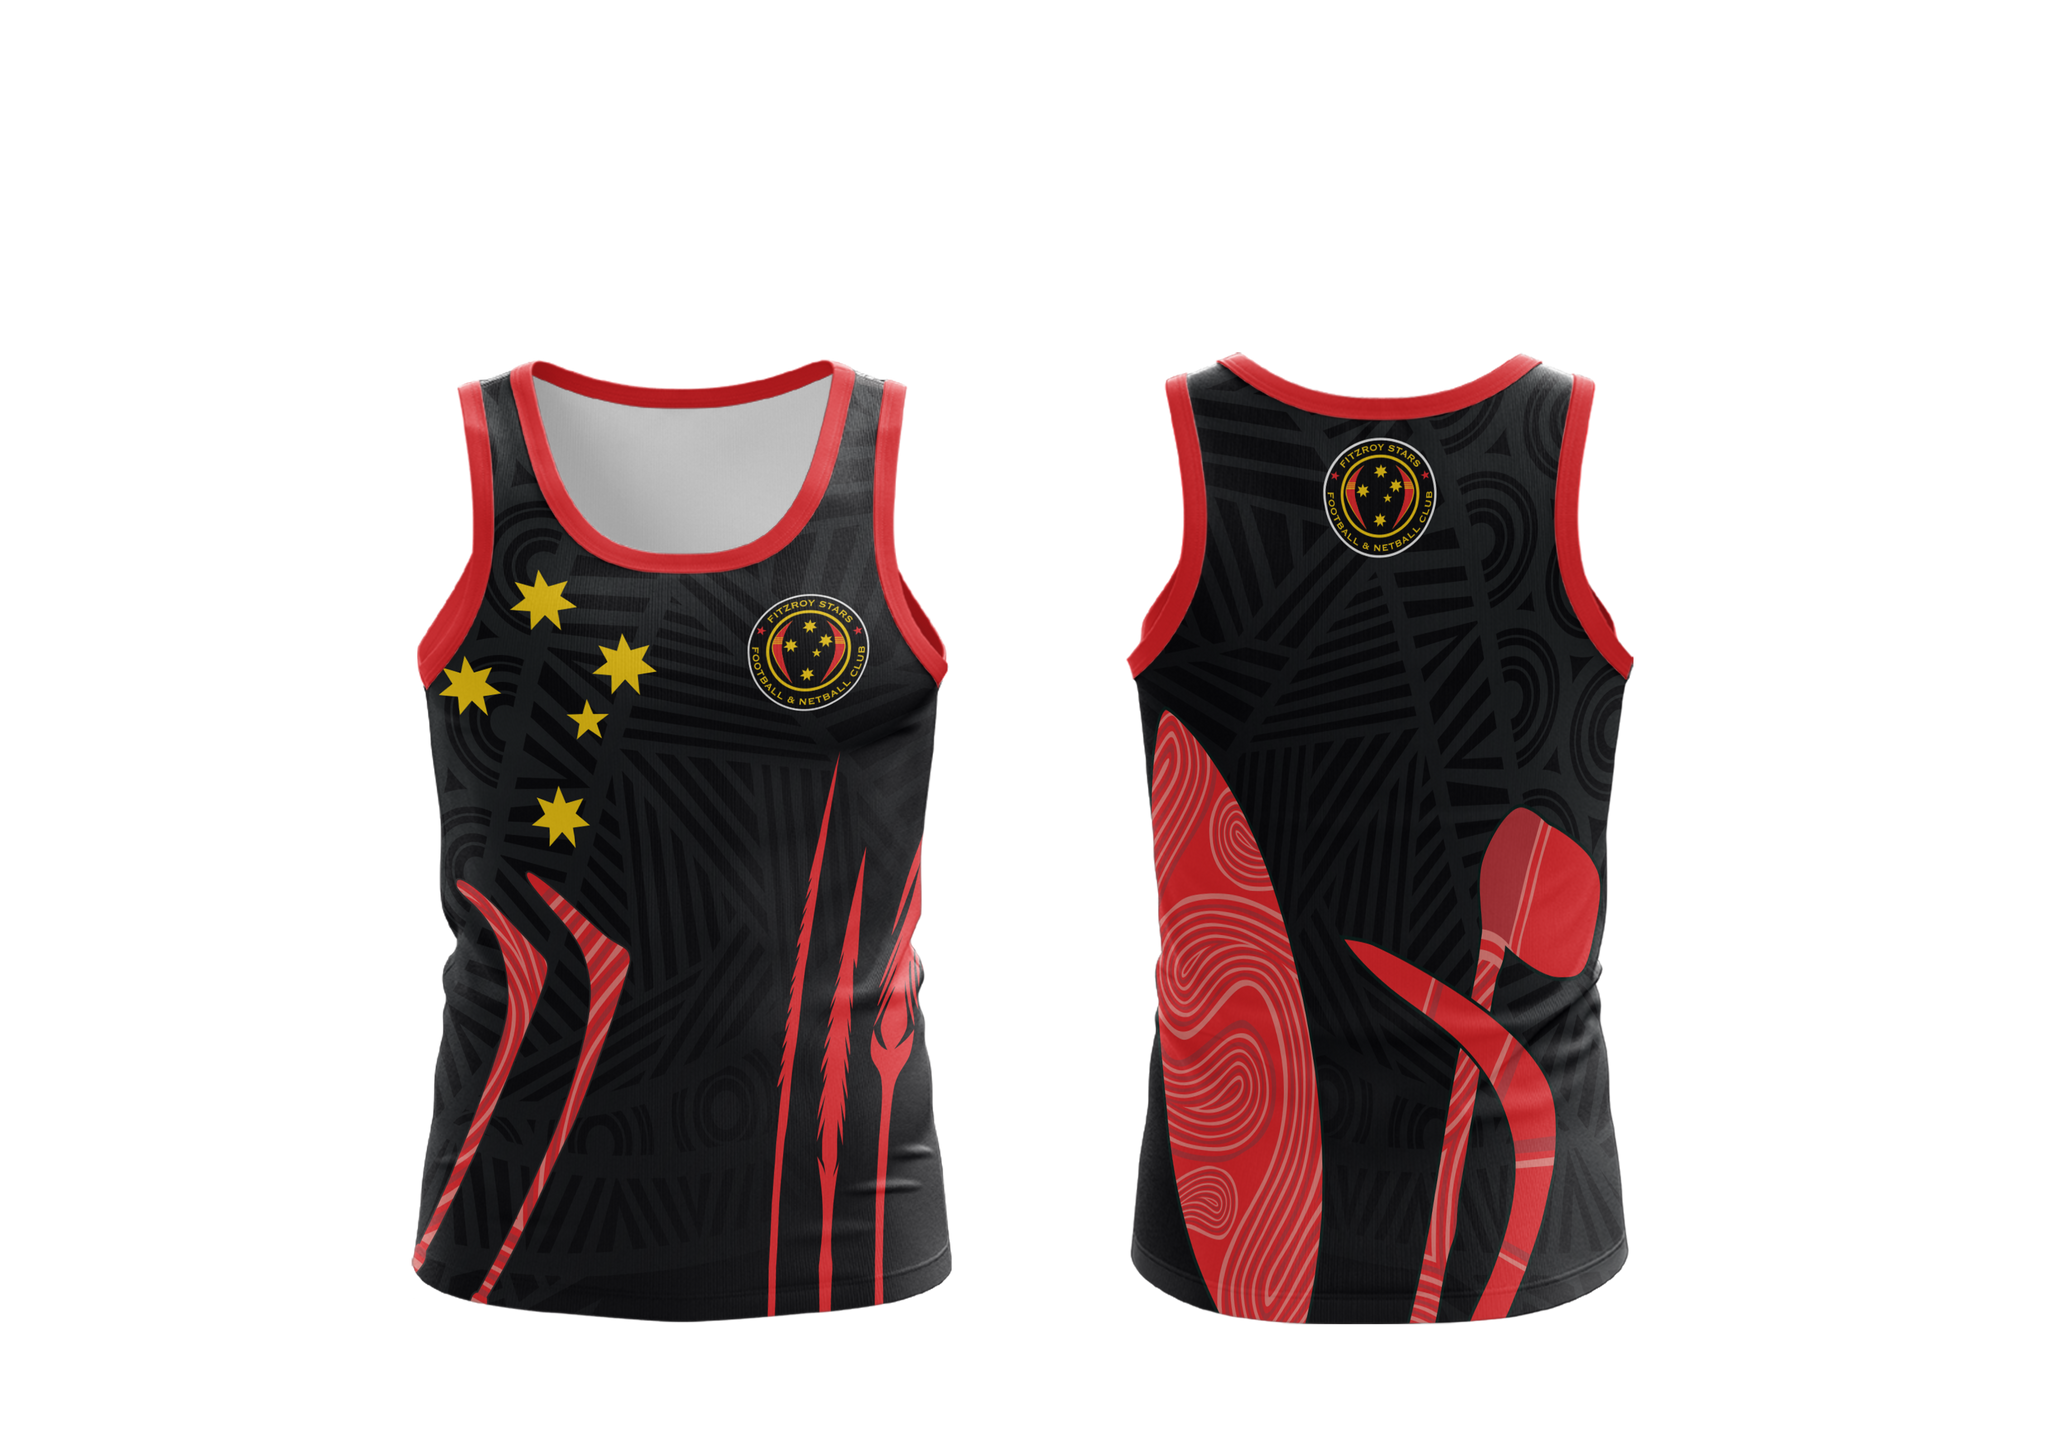 TRAINING SINGLETS – GAME DAY APPAREL